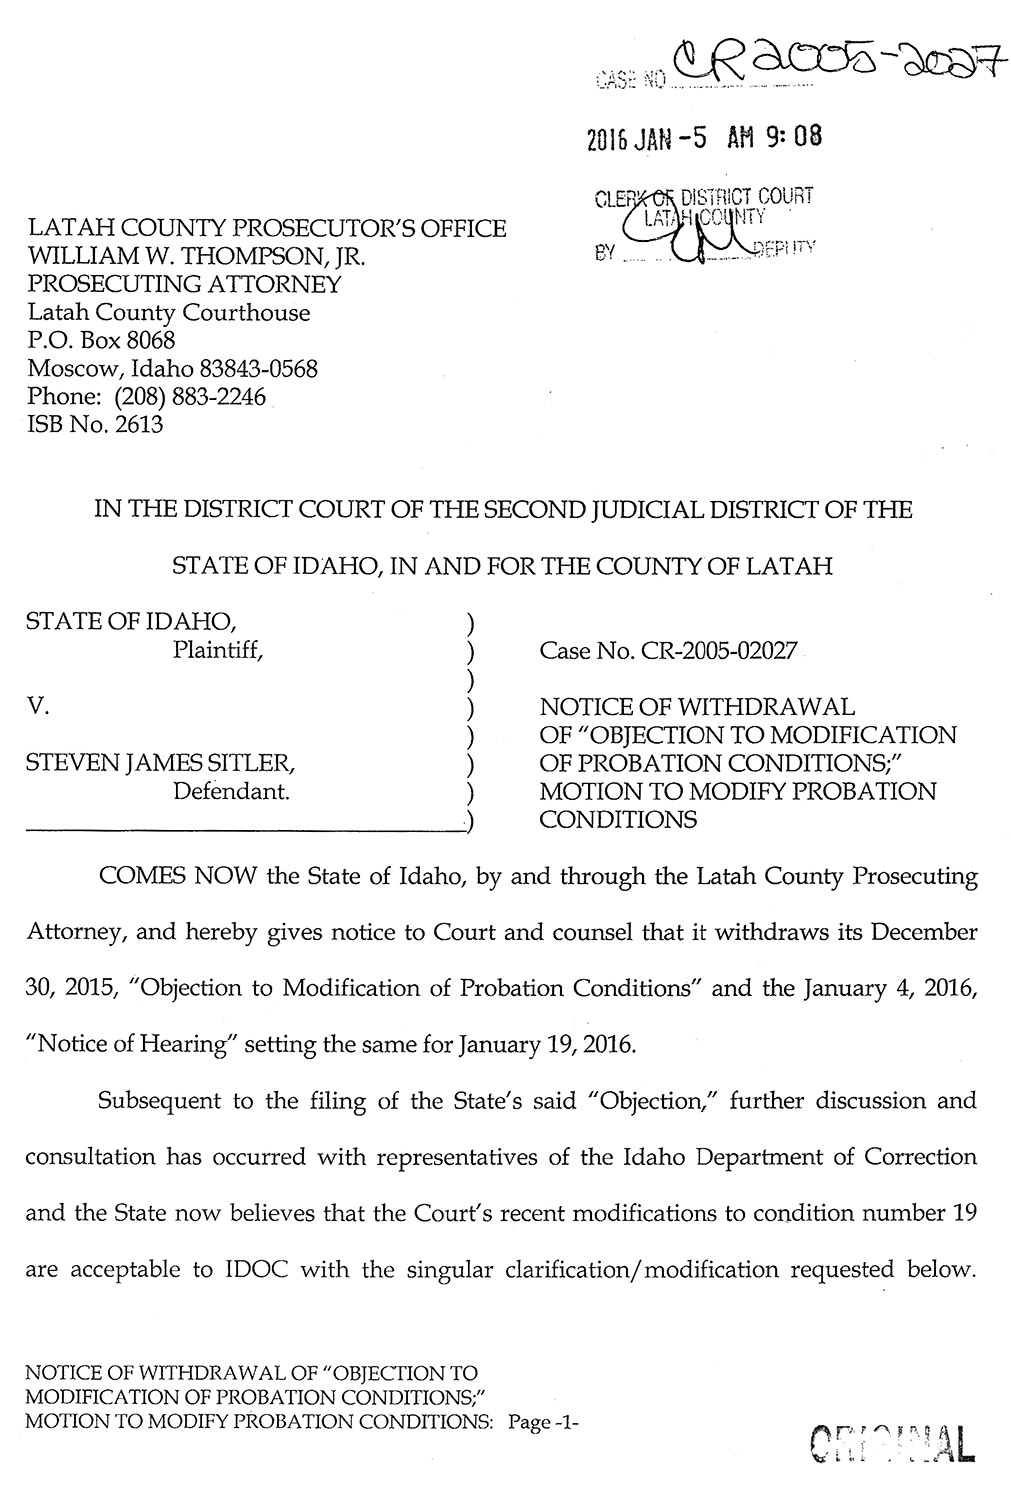 Notice of Withdrawal of “Objection to Modification of Probation Conditions”; Motion to Modify Probation Conditions page 1